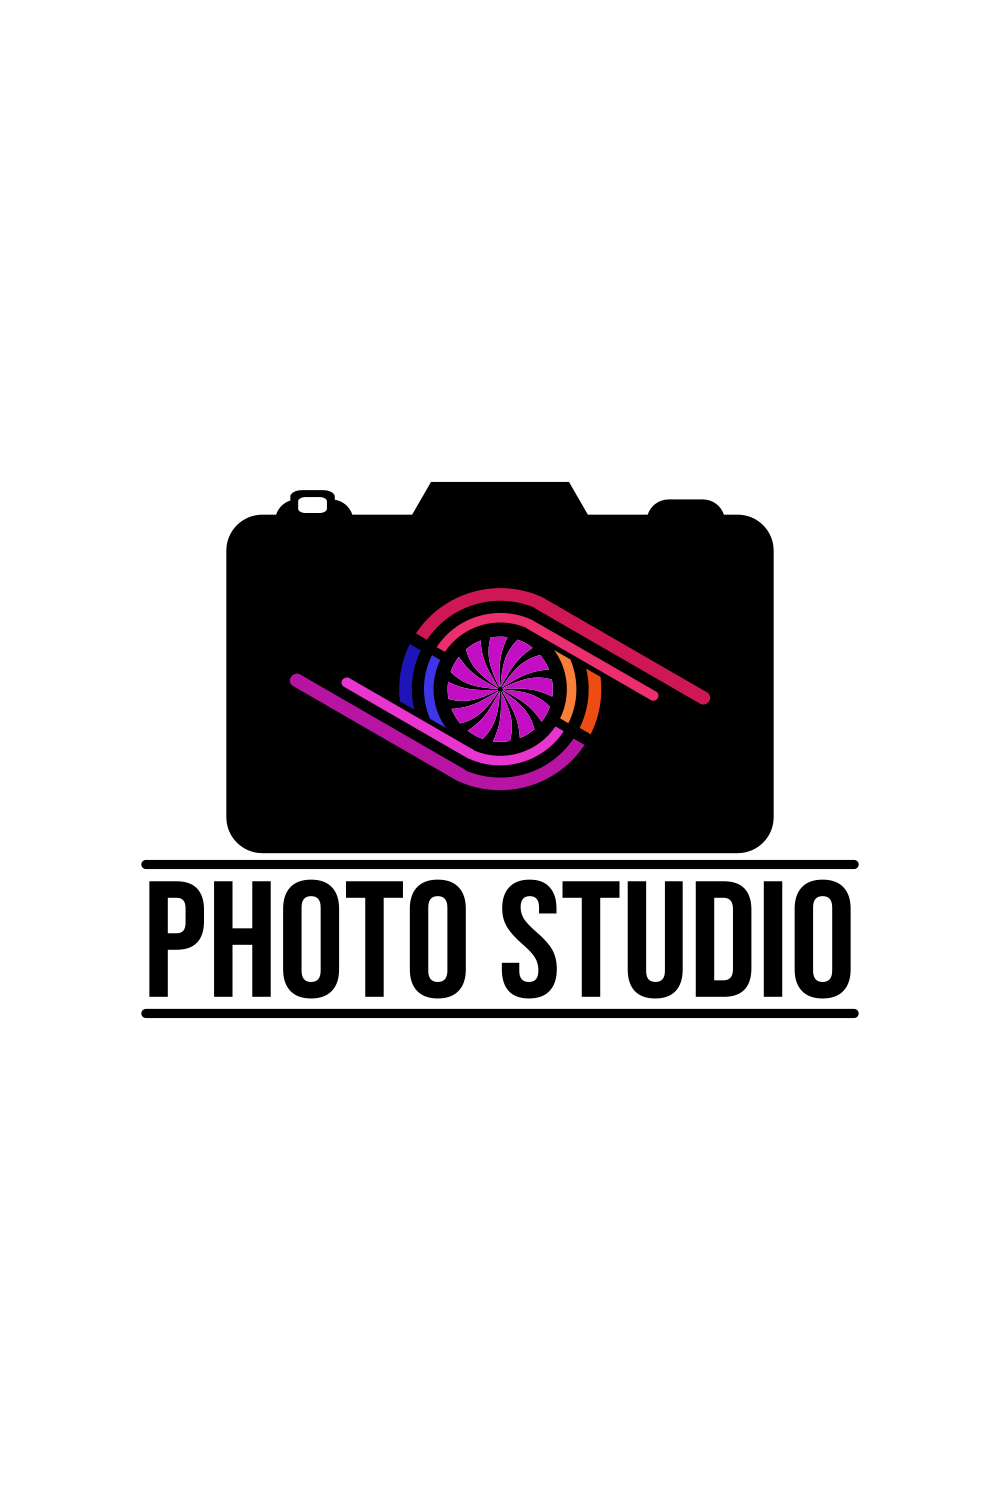 photography logo icon png